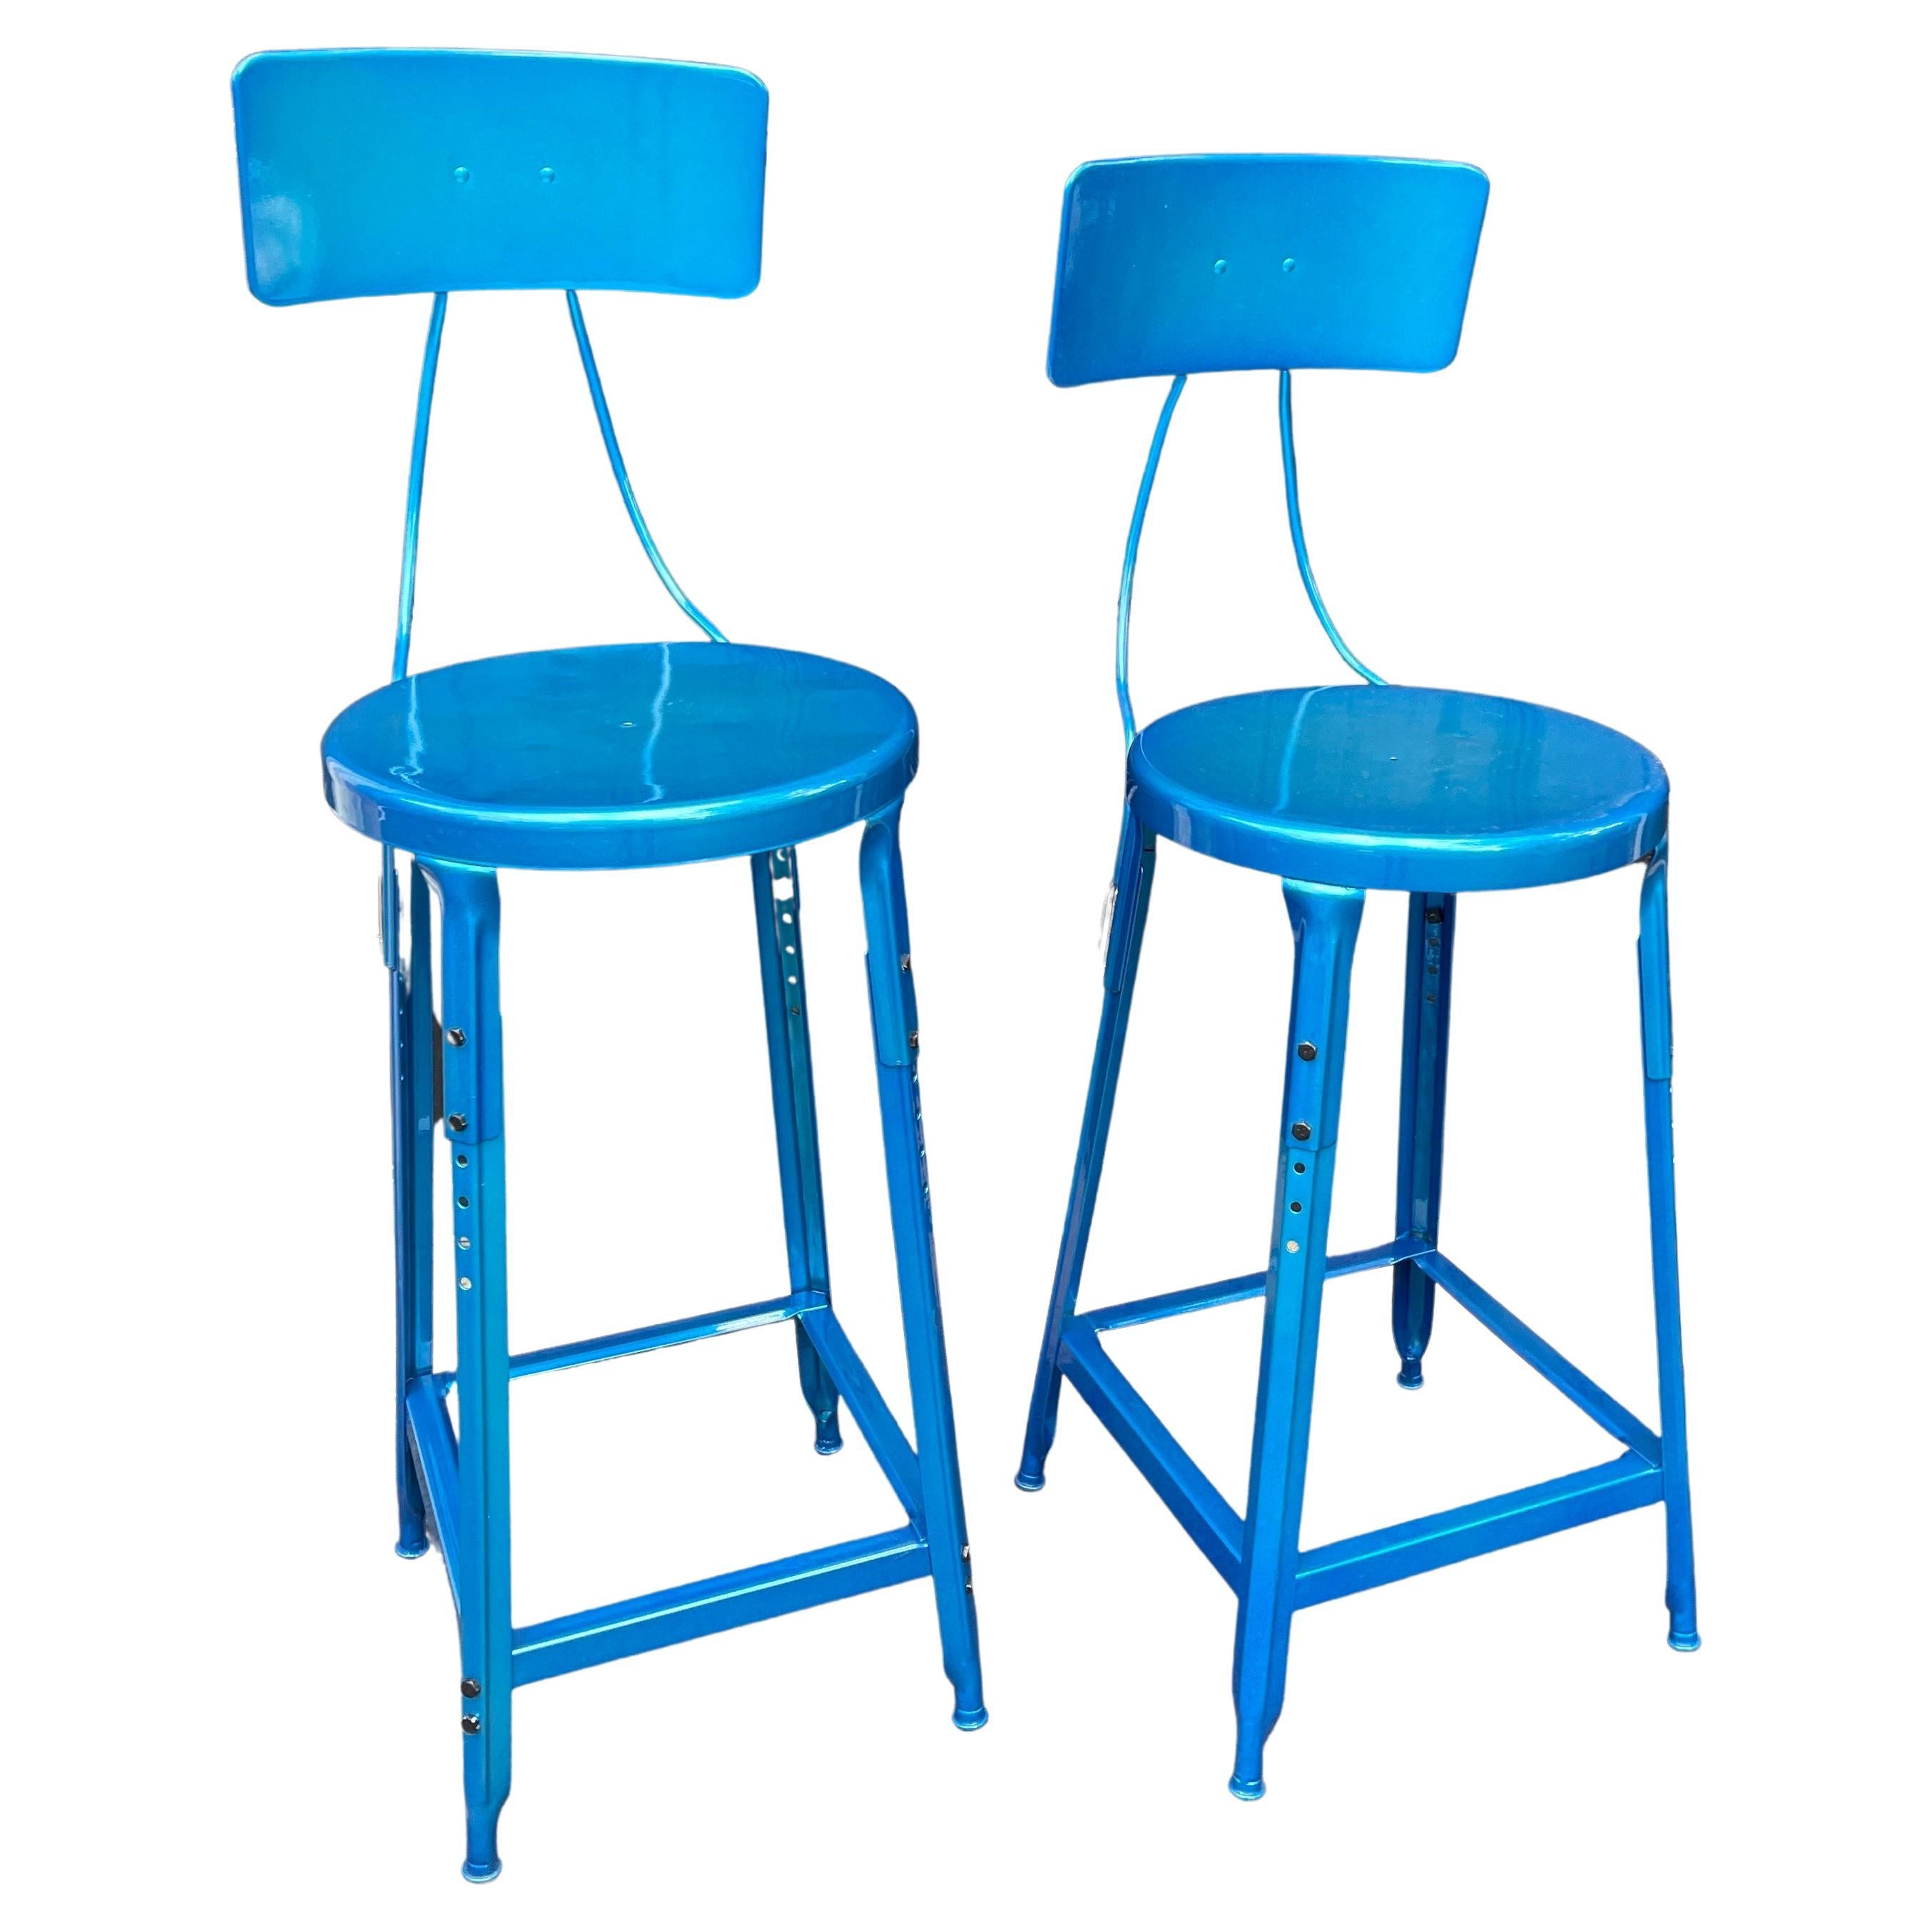 Set of Two Heavy Industrial metal bar stools with backs in Newly Powder Coated Maui Blue.
The chairs are not an even pair in height:
The smaller bar stool measures: 
Height of back is 39.5 inches
Width is 15 inches
Seat height 25.24